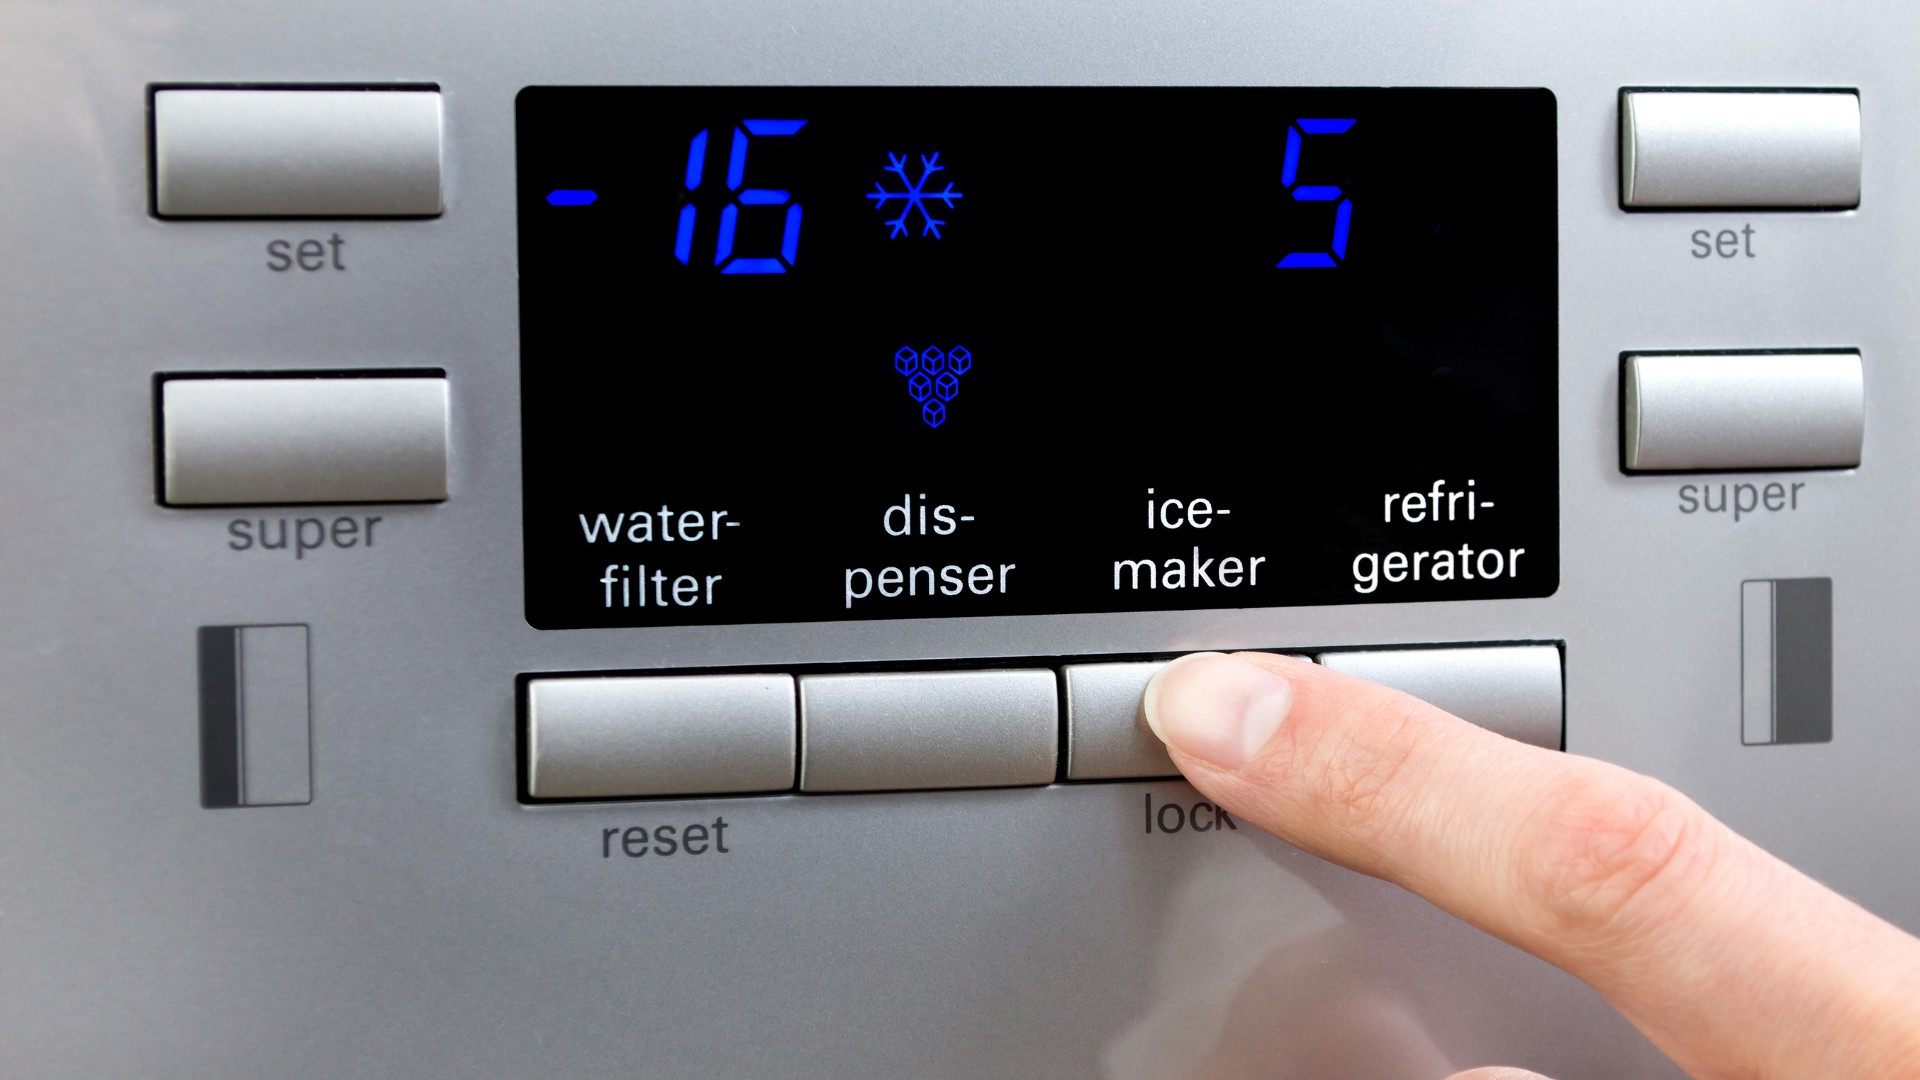 How To Turn On Samsung Refrigerator Ice Maker